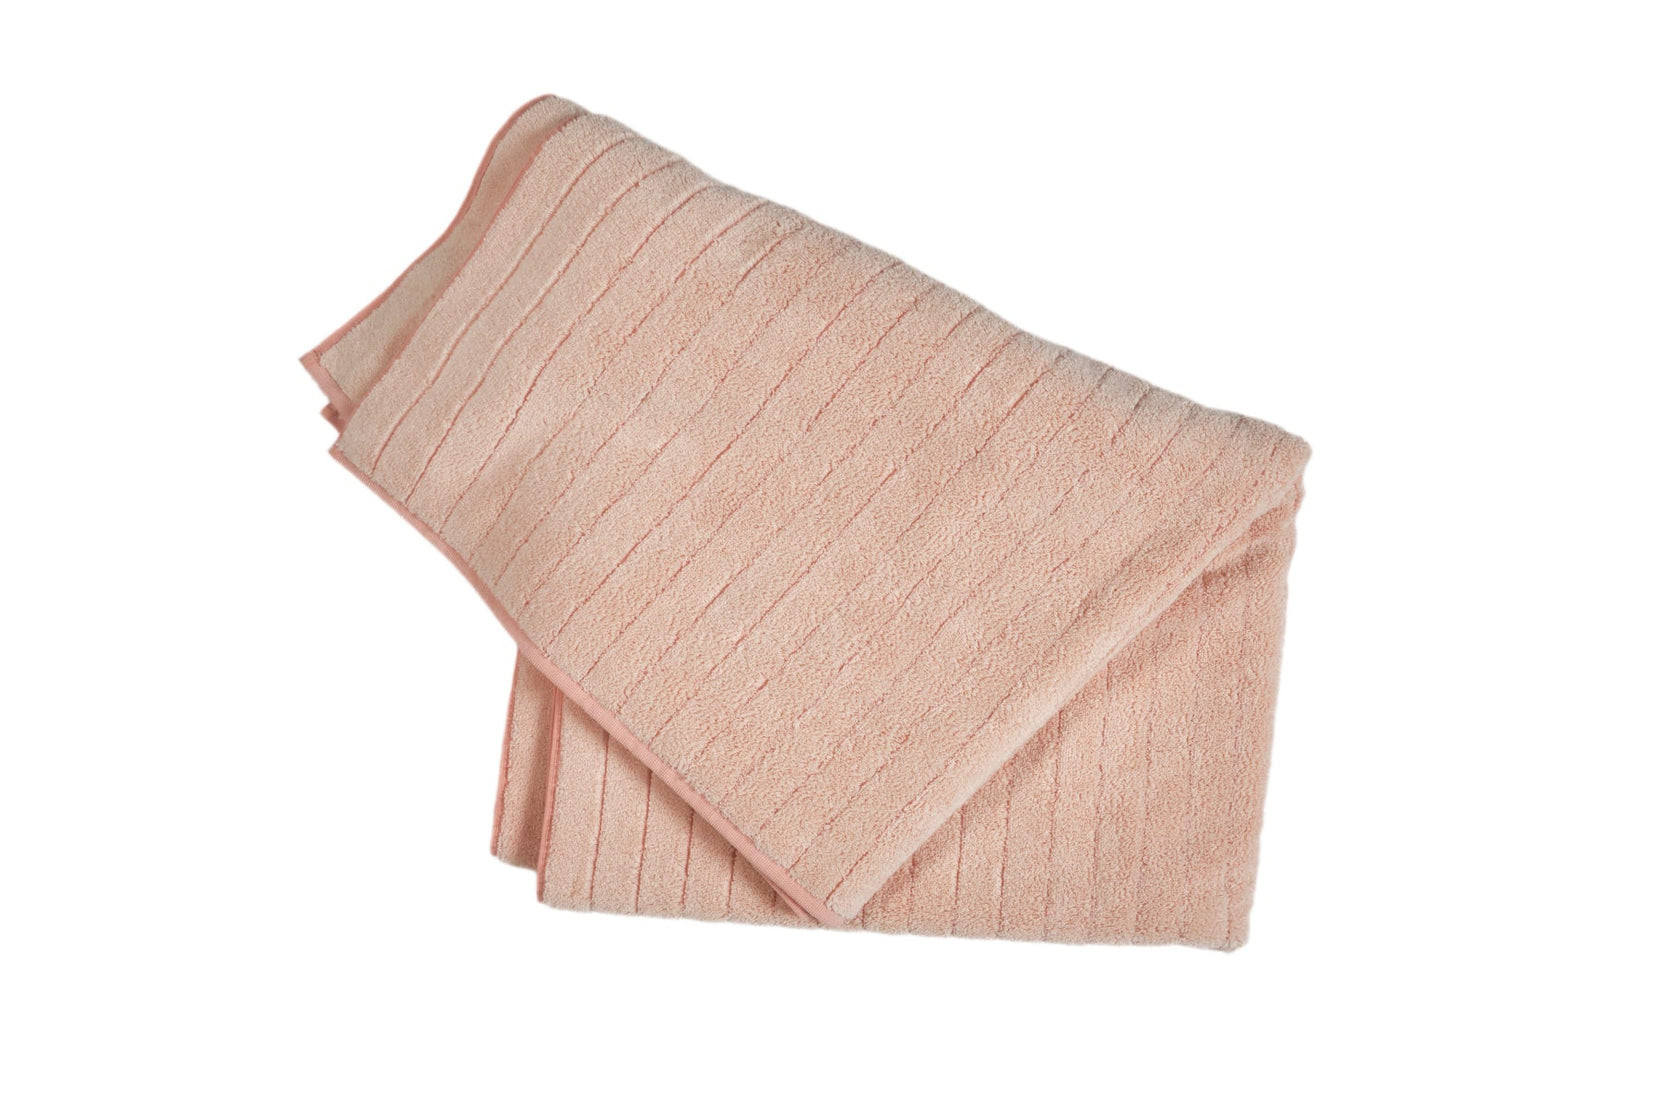 Individual Oversized Large Striped Cotton Hand Loom Dish Cloths